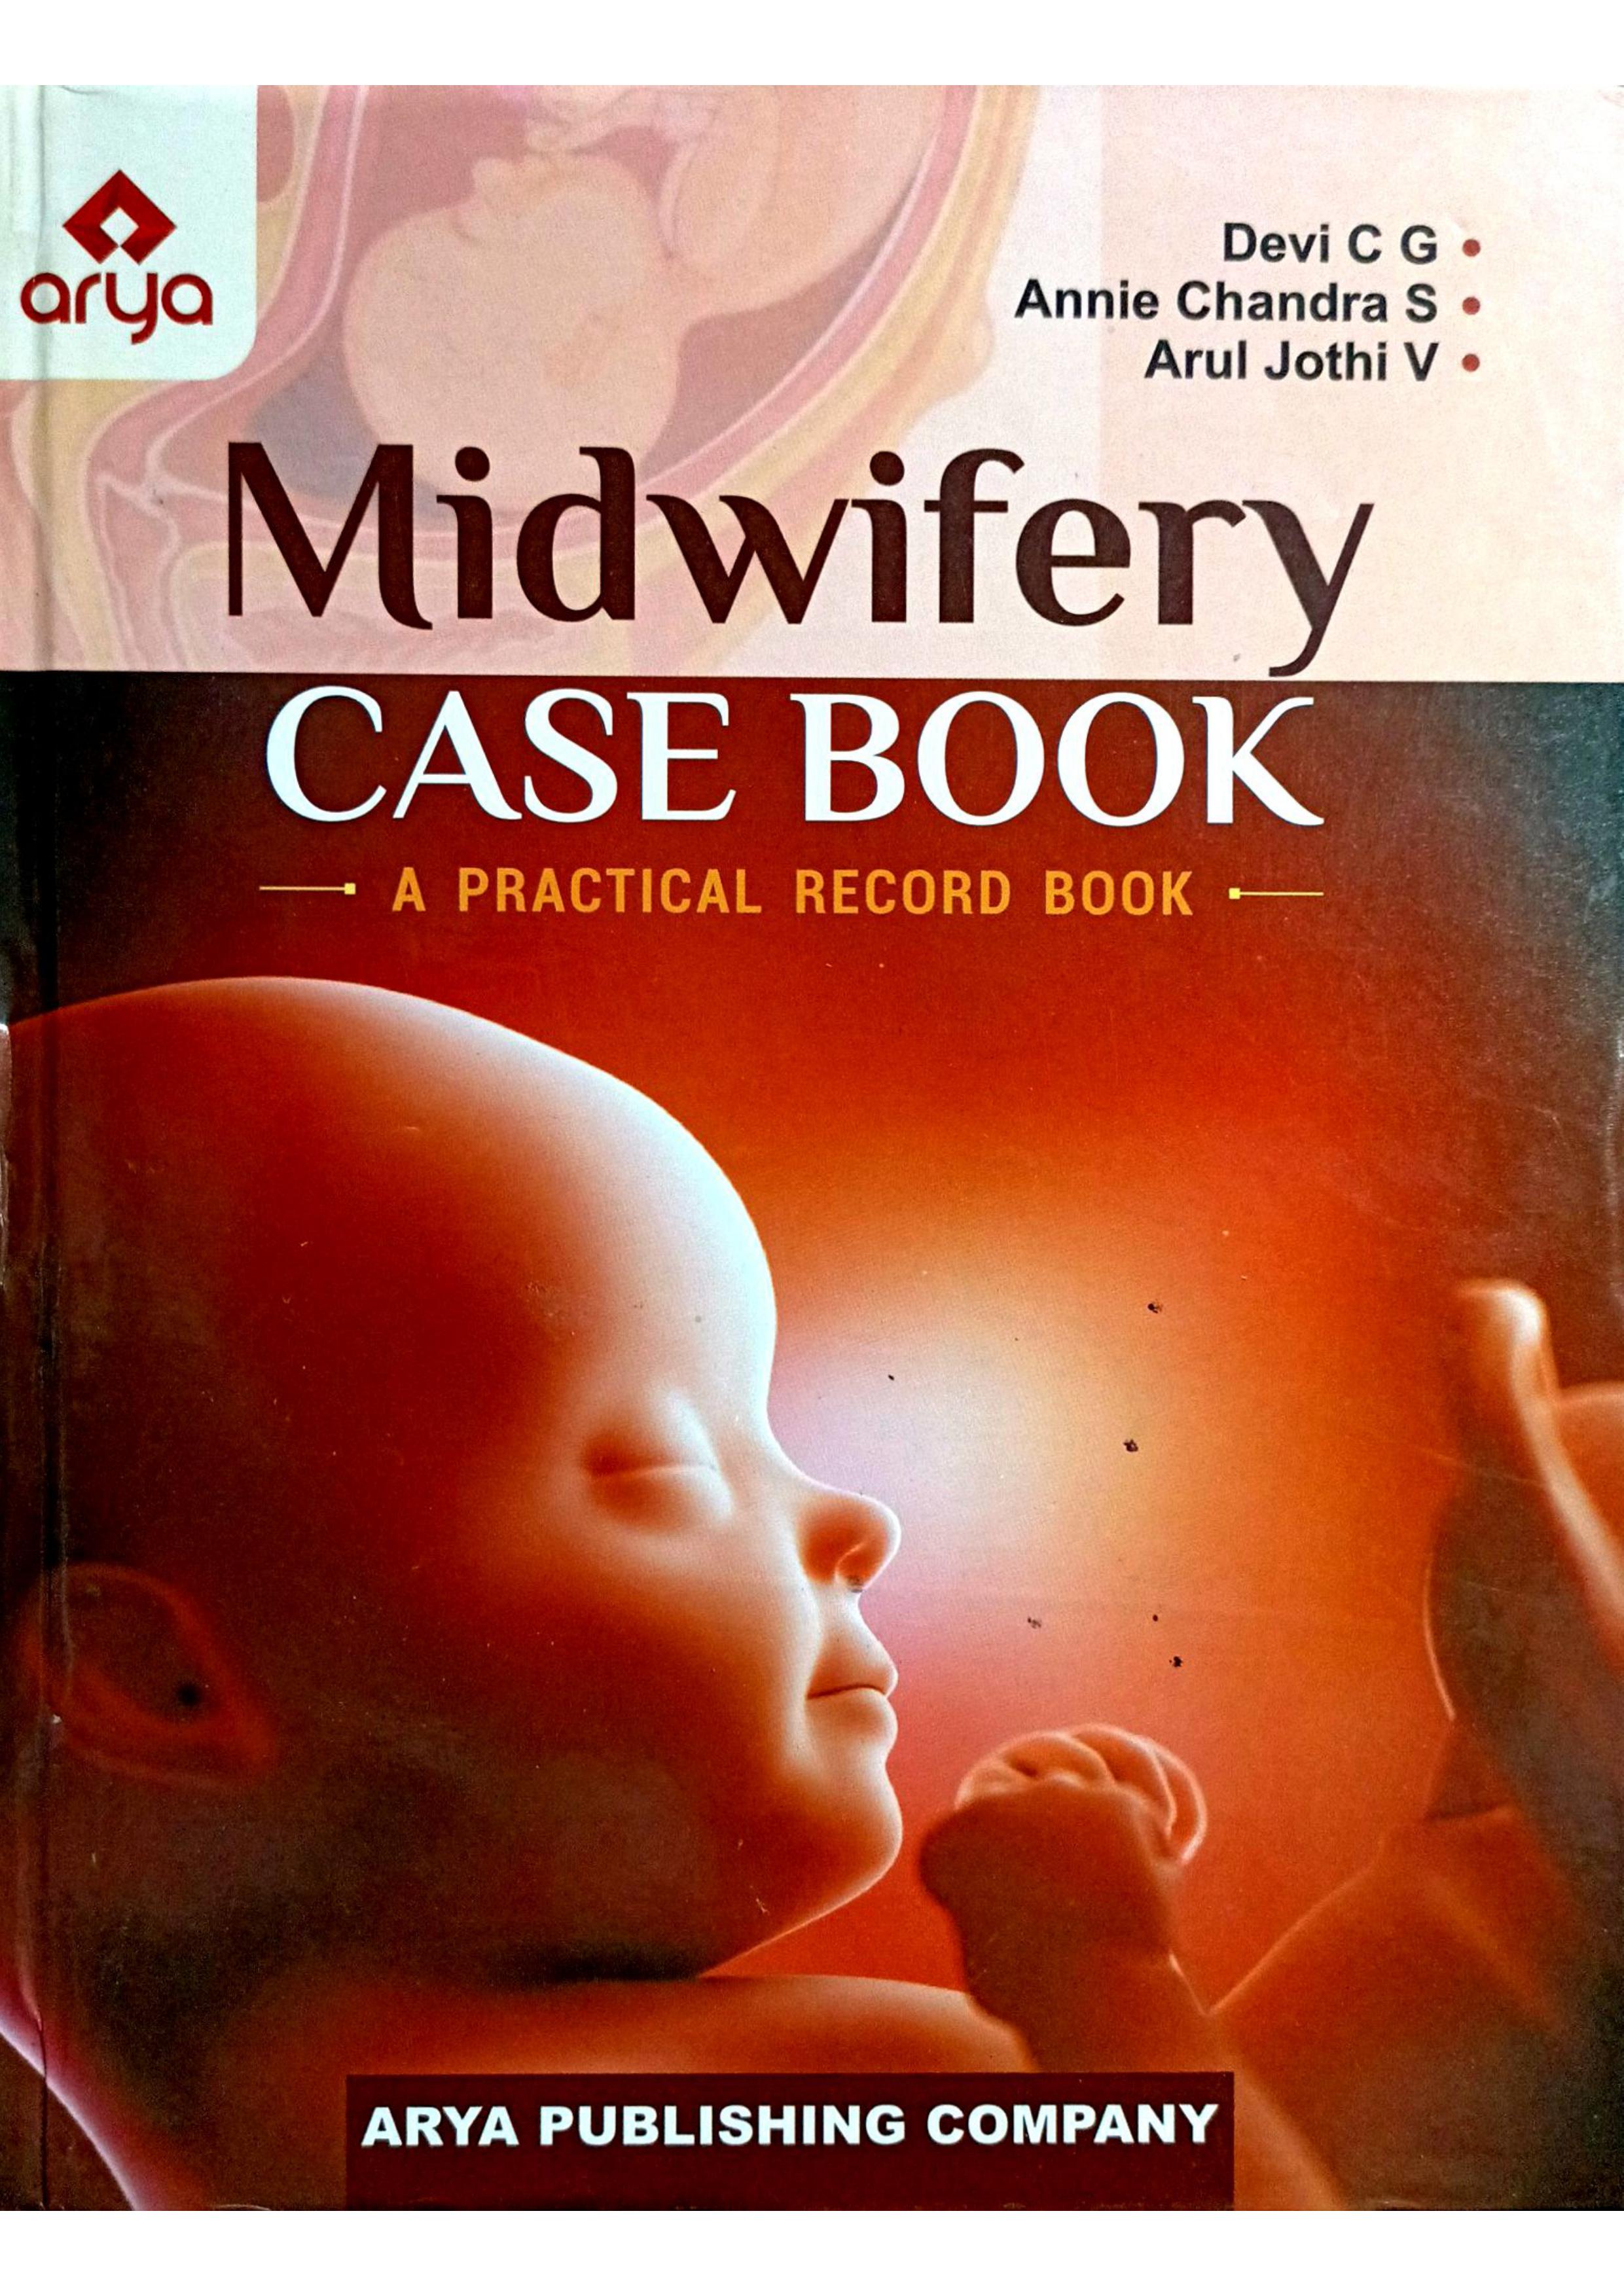 objectives of midwifery case study intrapartum